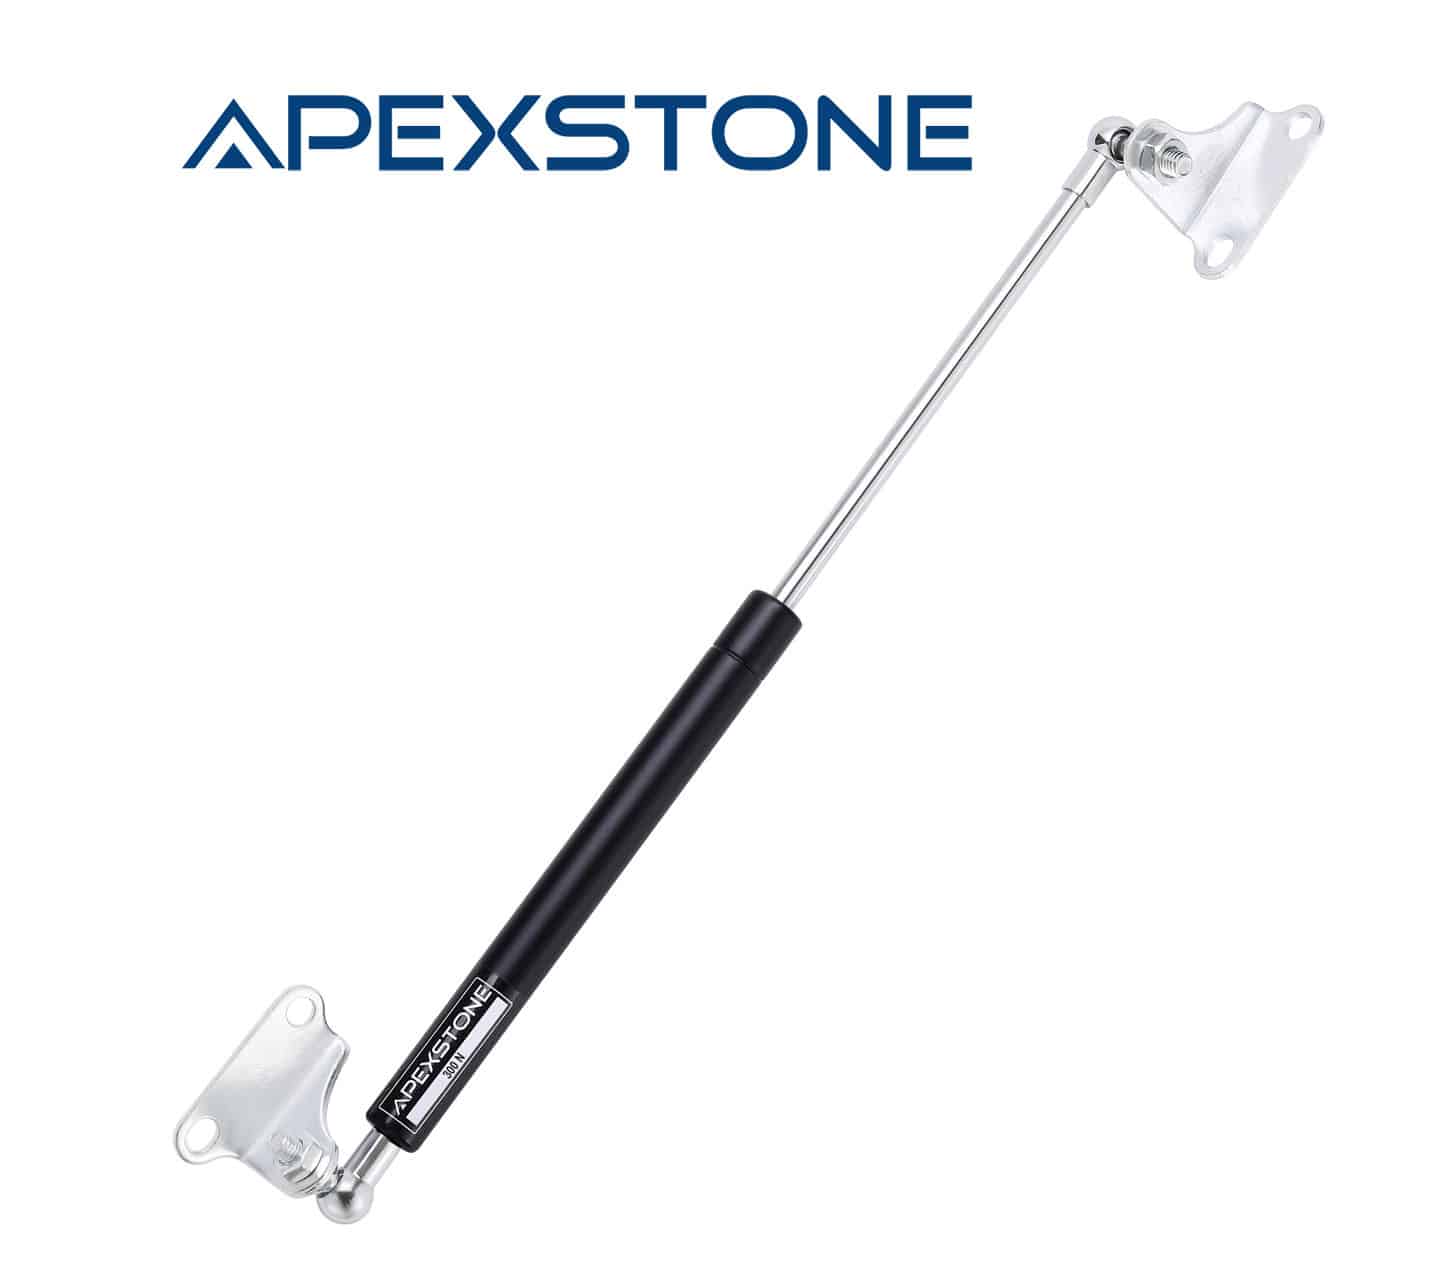 https://apexstone.co/wp-content/uploads/2022/07/1-piece-of-apexstone-380mm300N-gas-strut.jpg